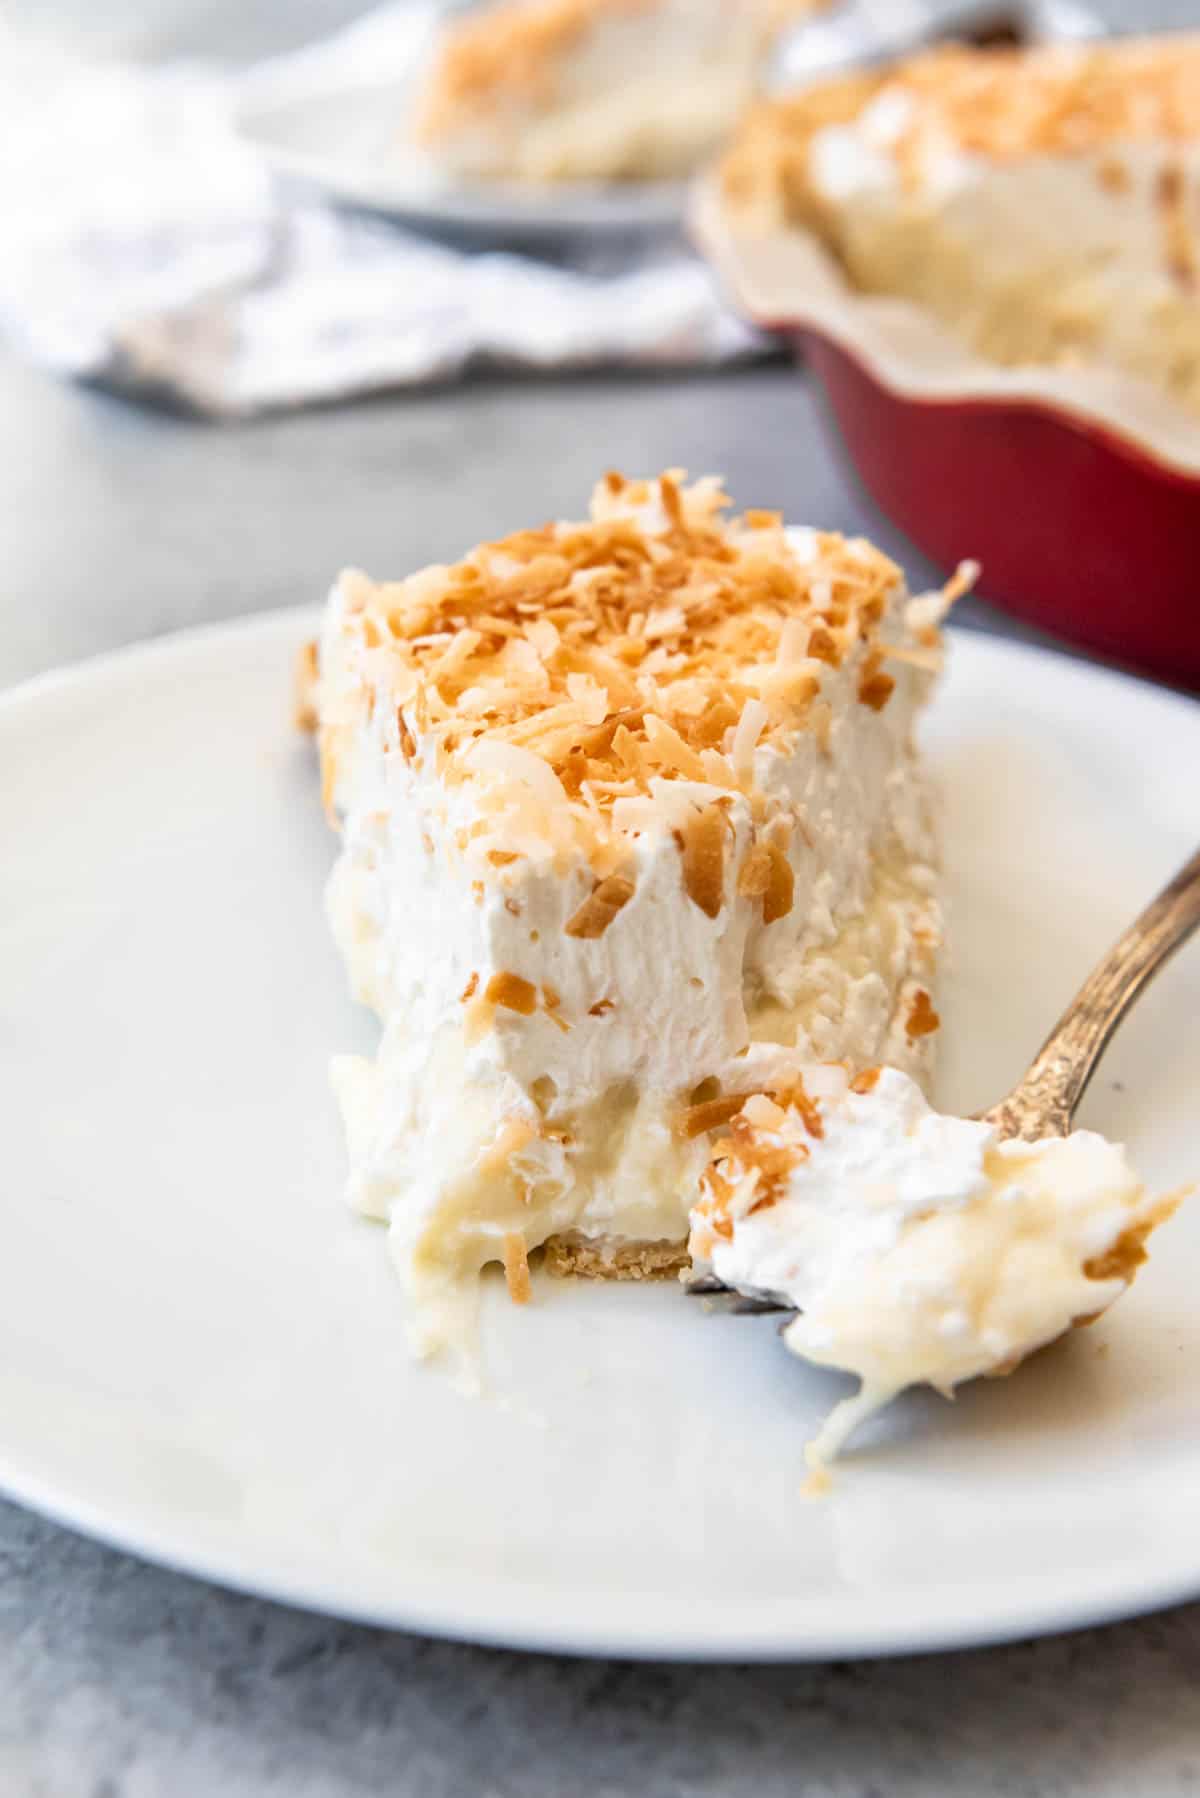 A close image of a slice of coconut cream pie with a bite taken out of it.